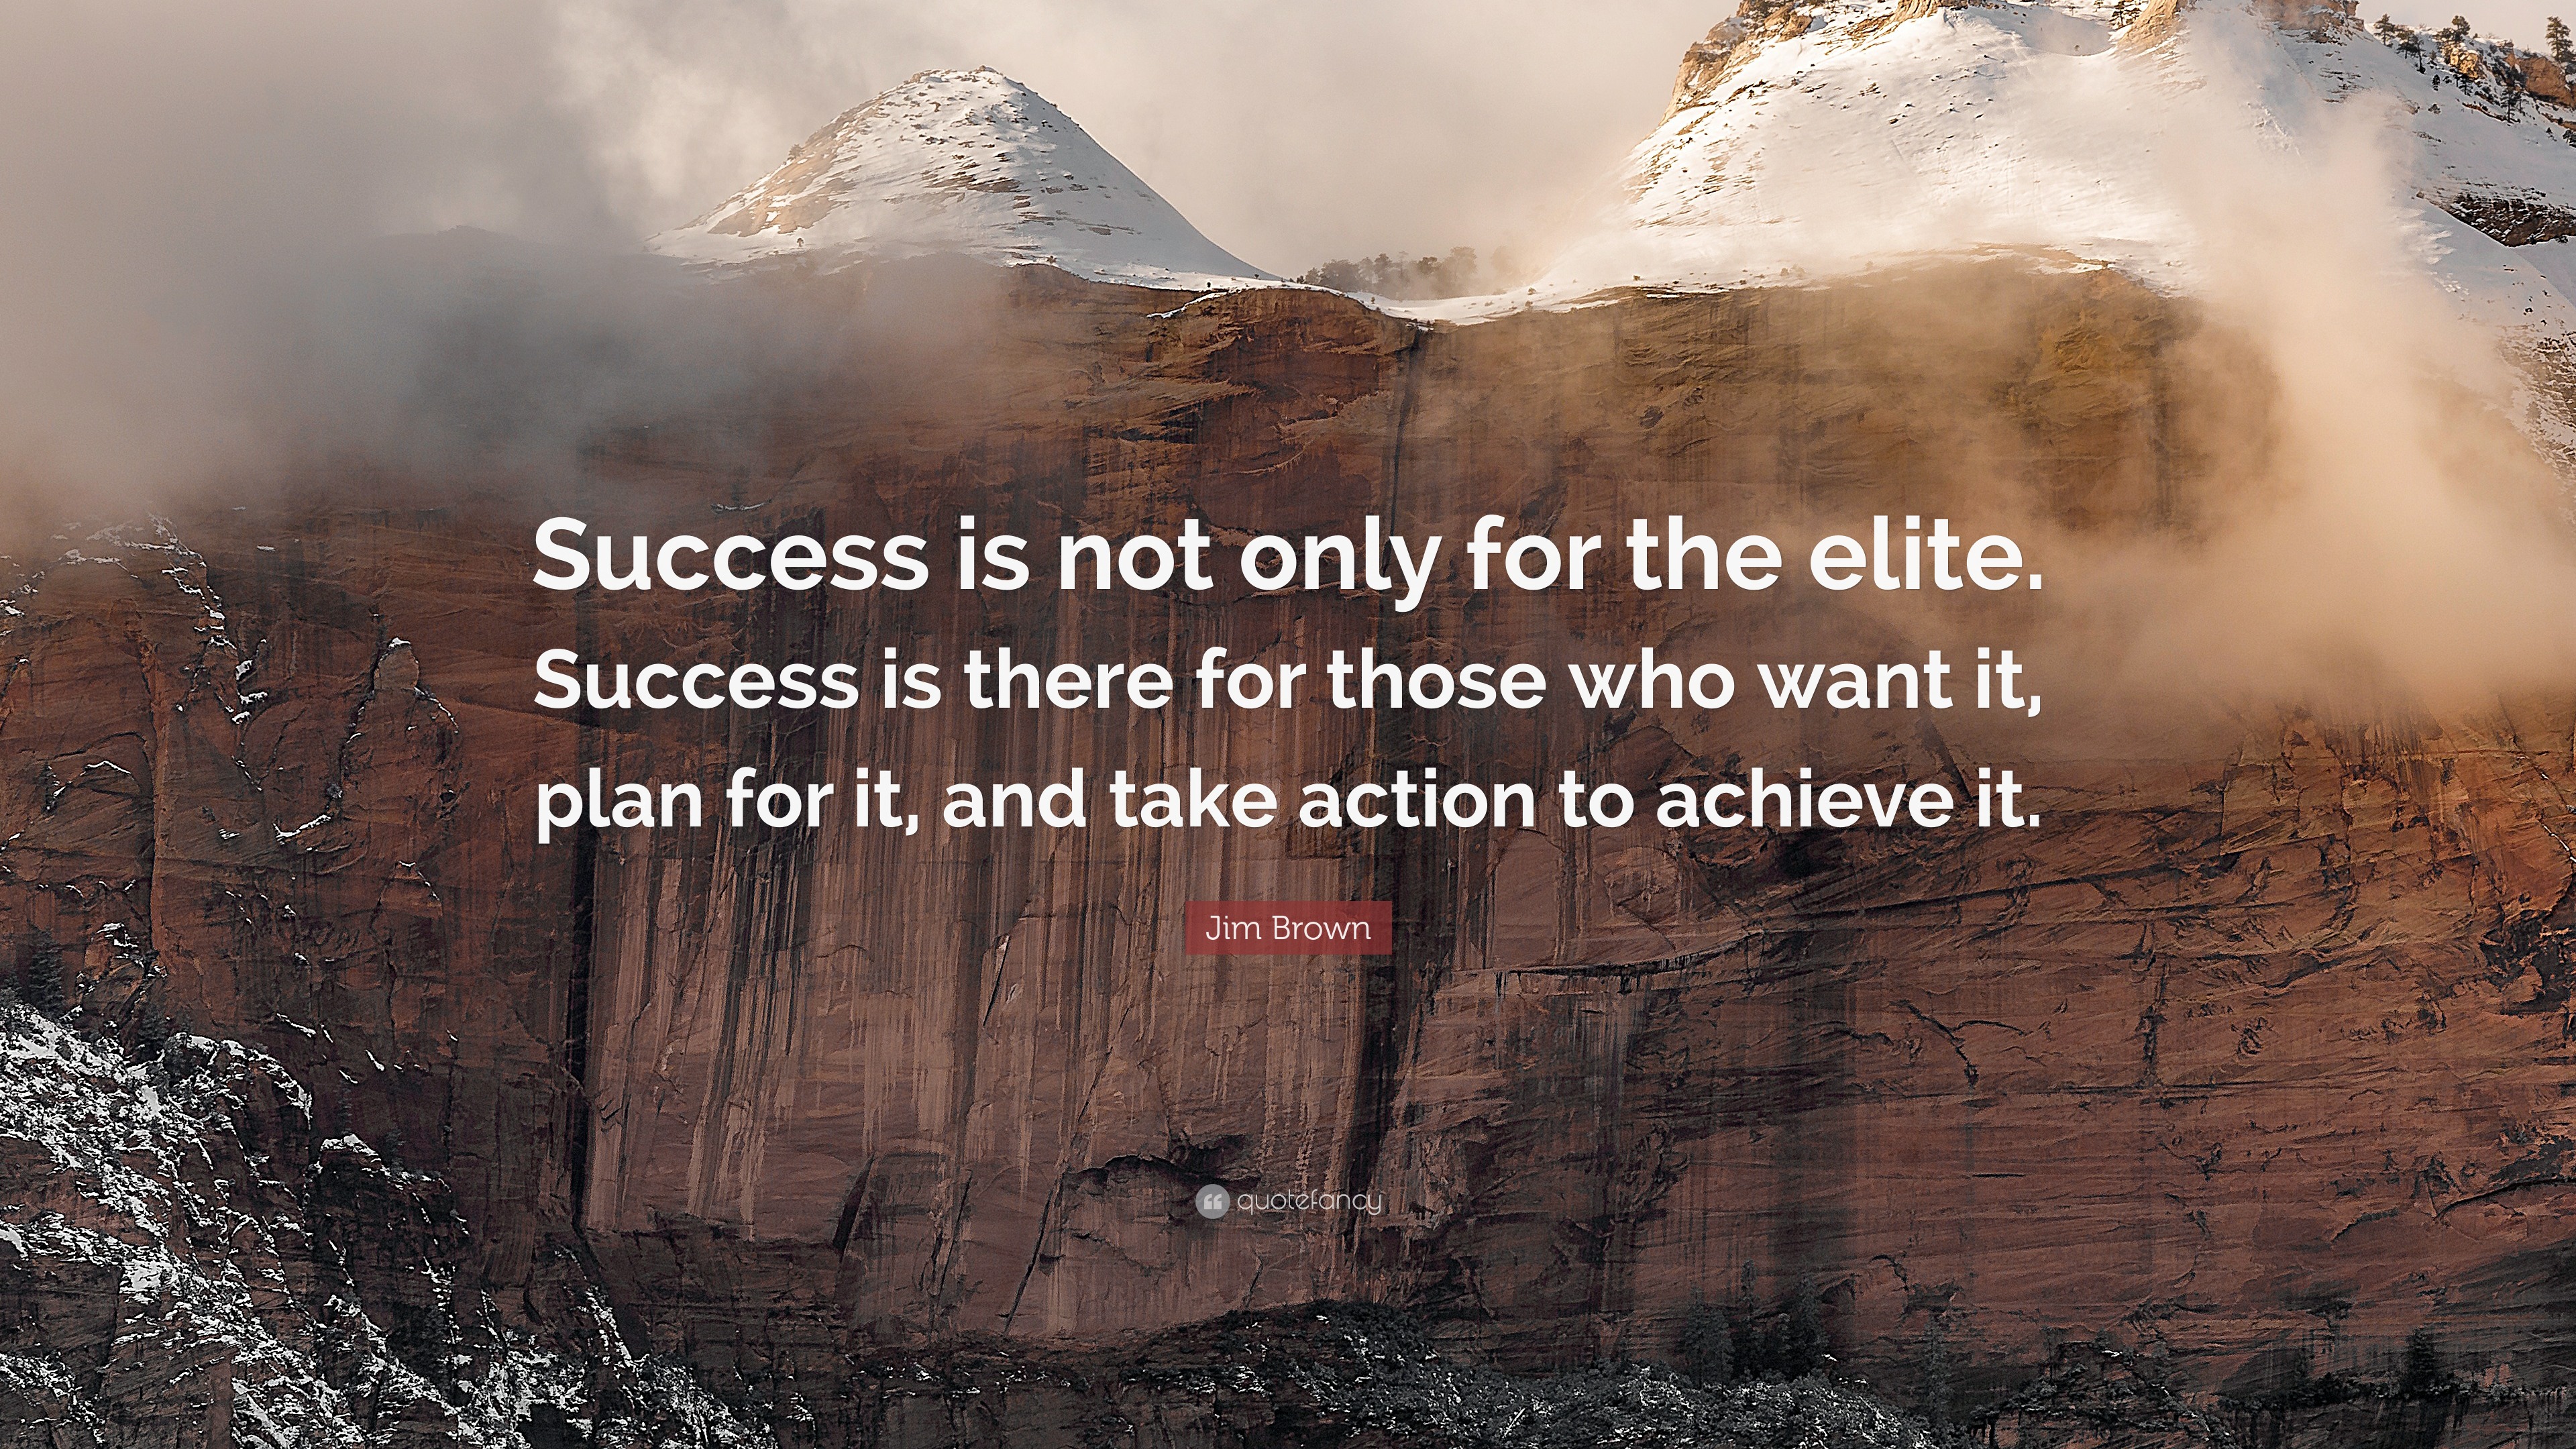 Jim Brown Quote: “Success is not only for the elite. Success is